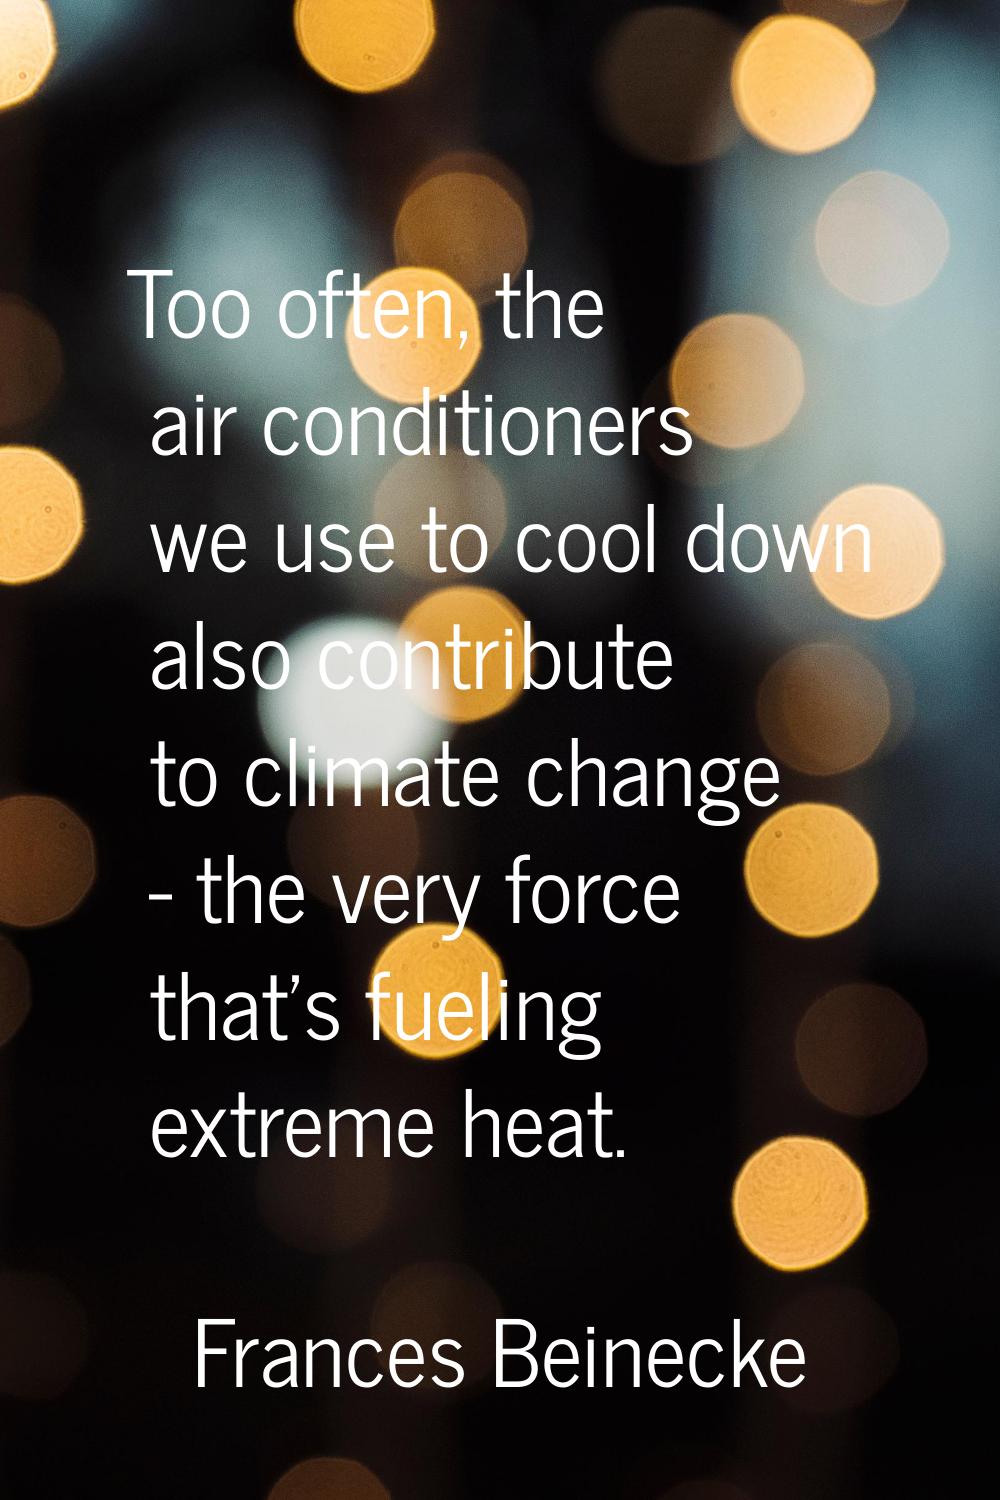 Too often, the air conditioners we use to cool down also contribute to climate change - the very fo